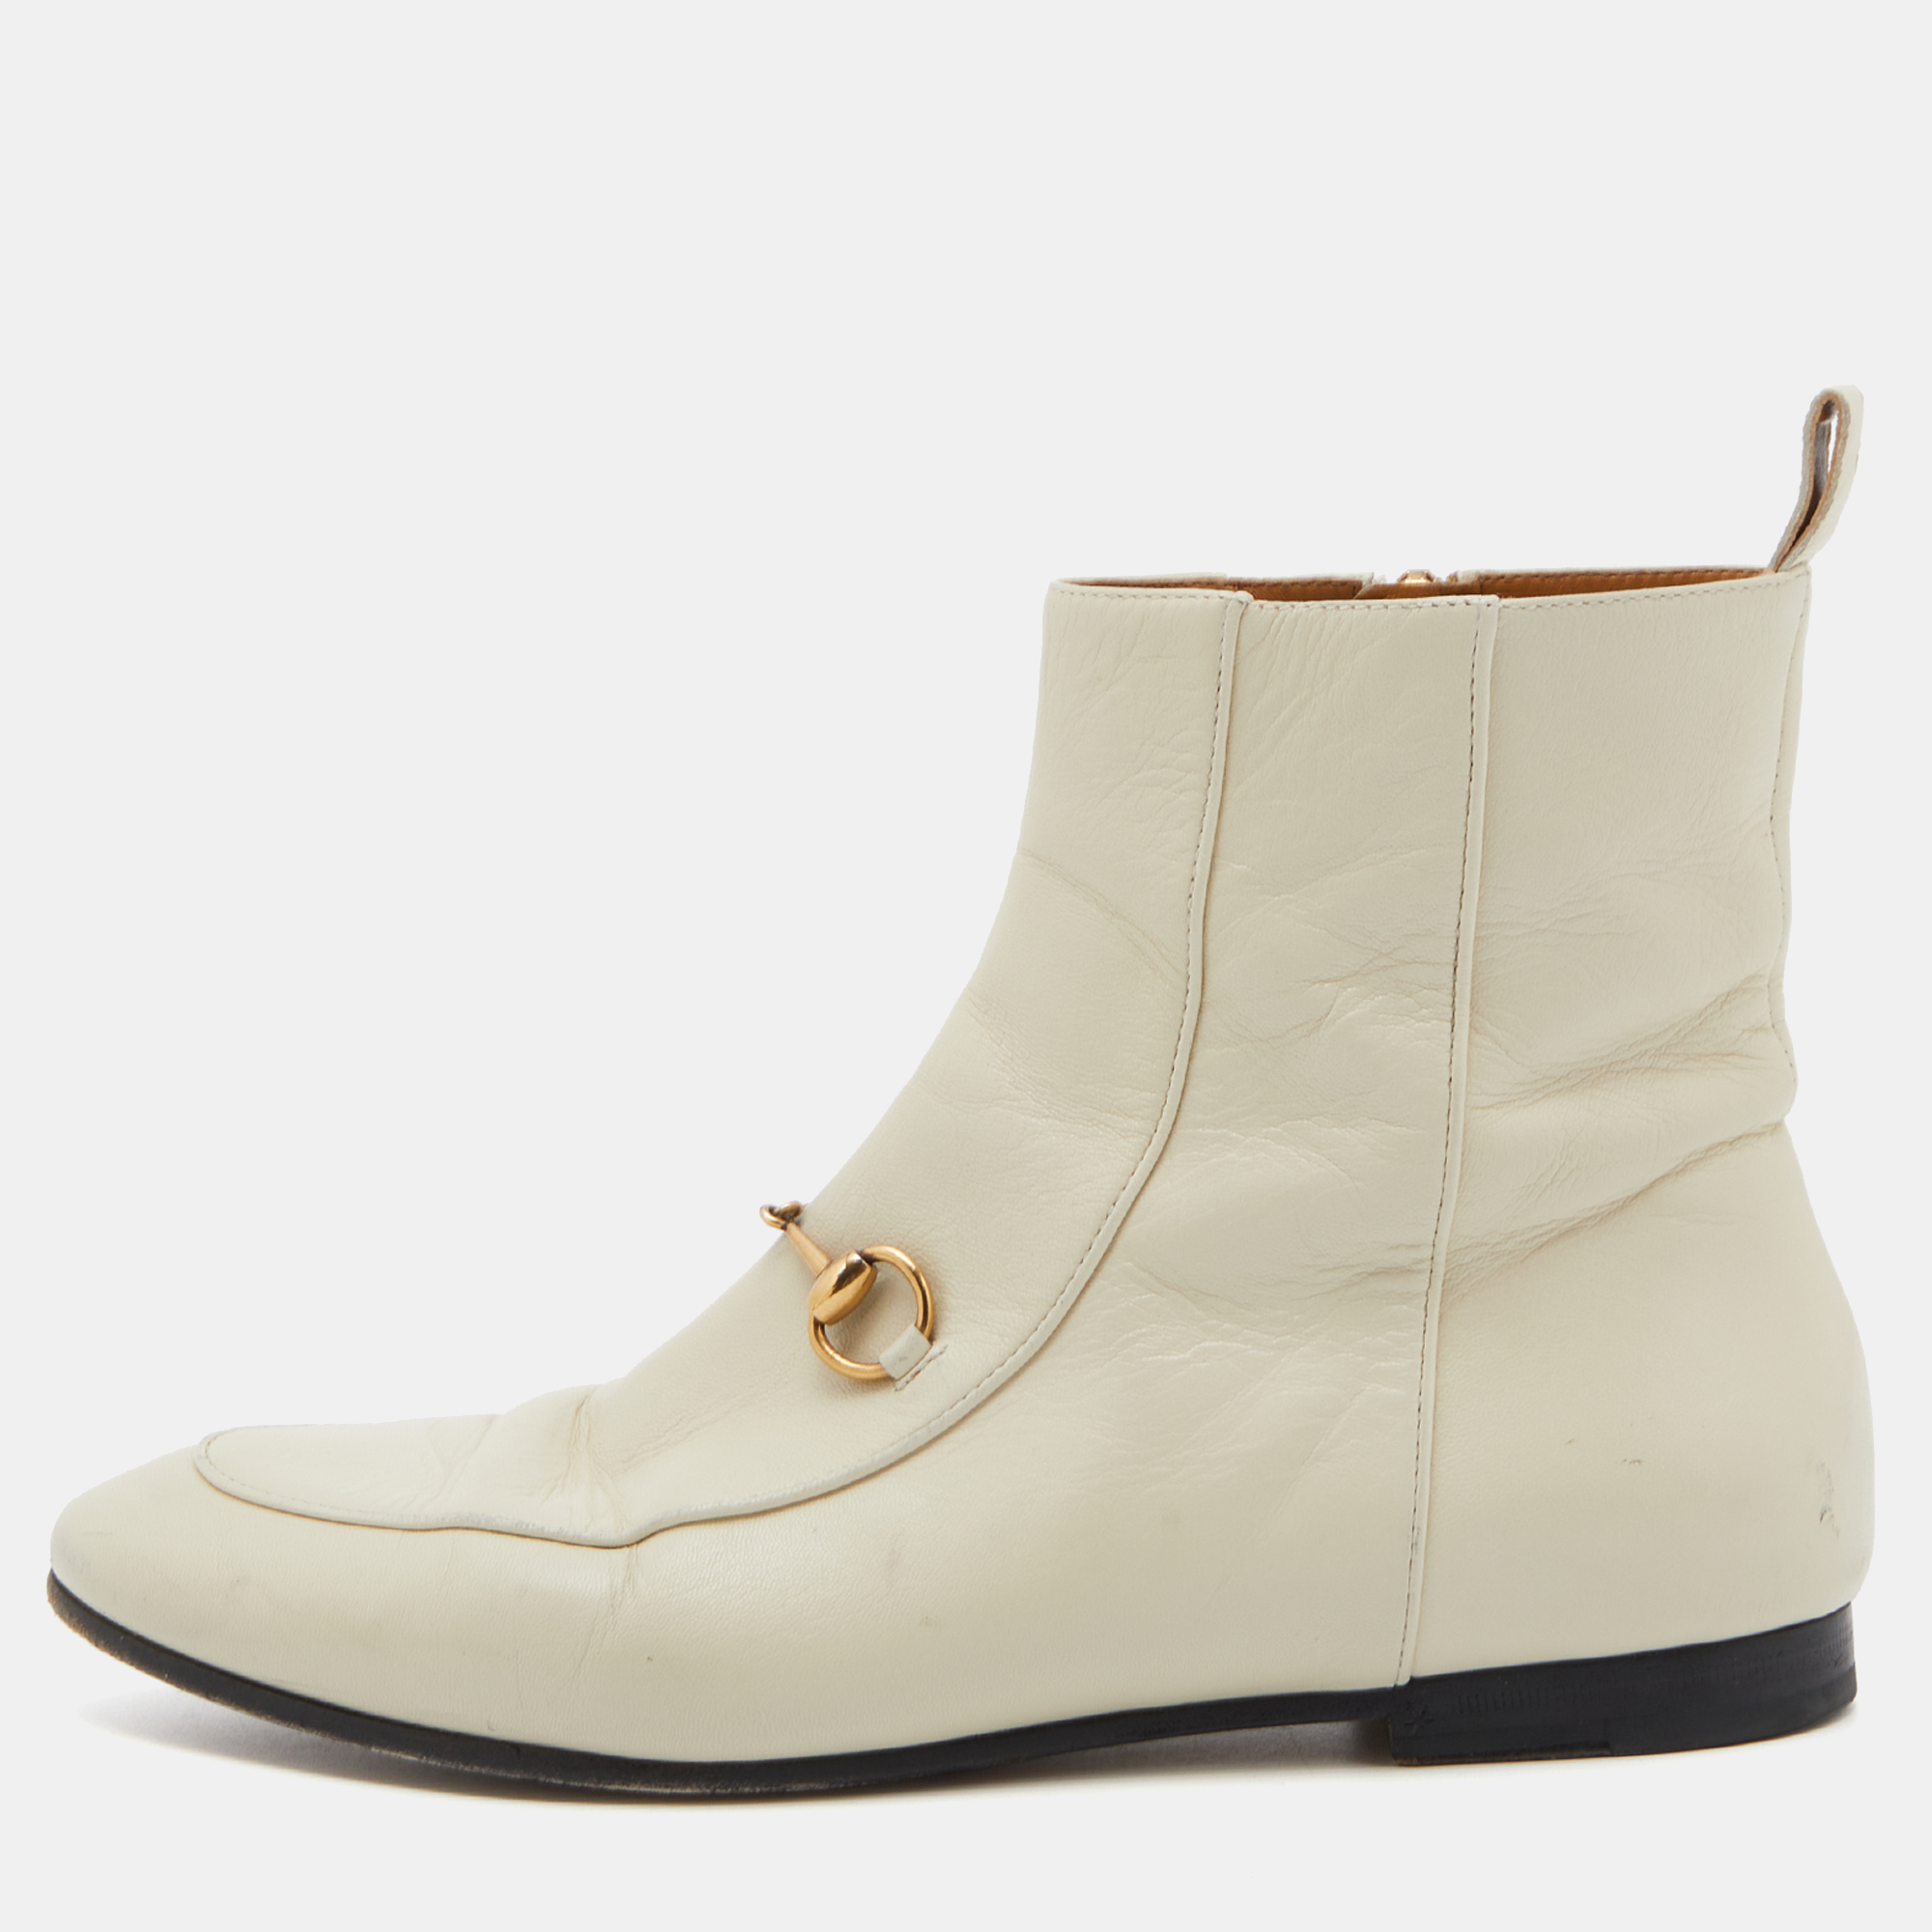 Pre-owned Gucci Cream Leather Horsebit Ankle Boots Size 38